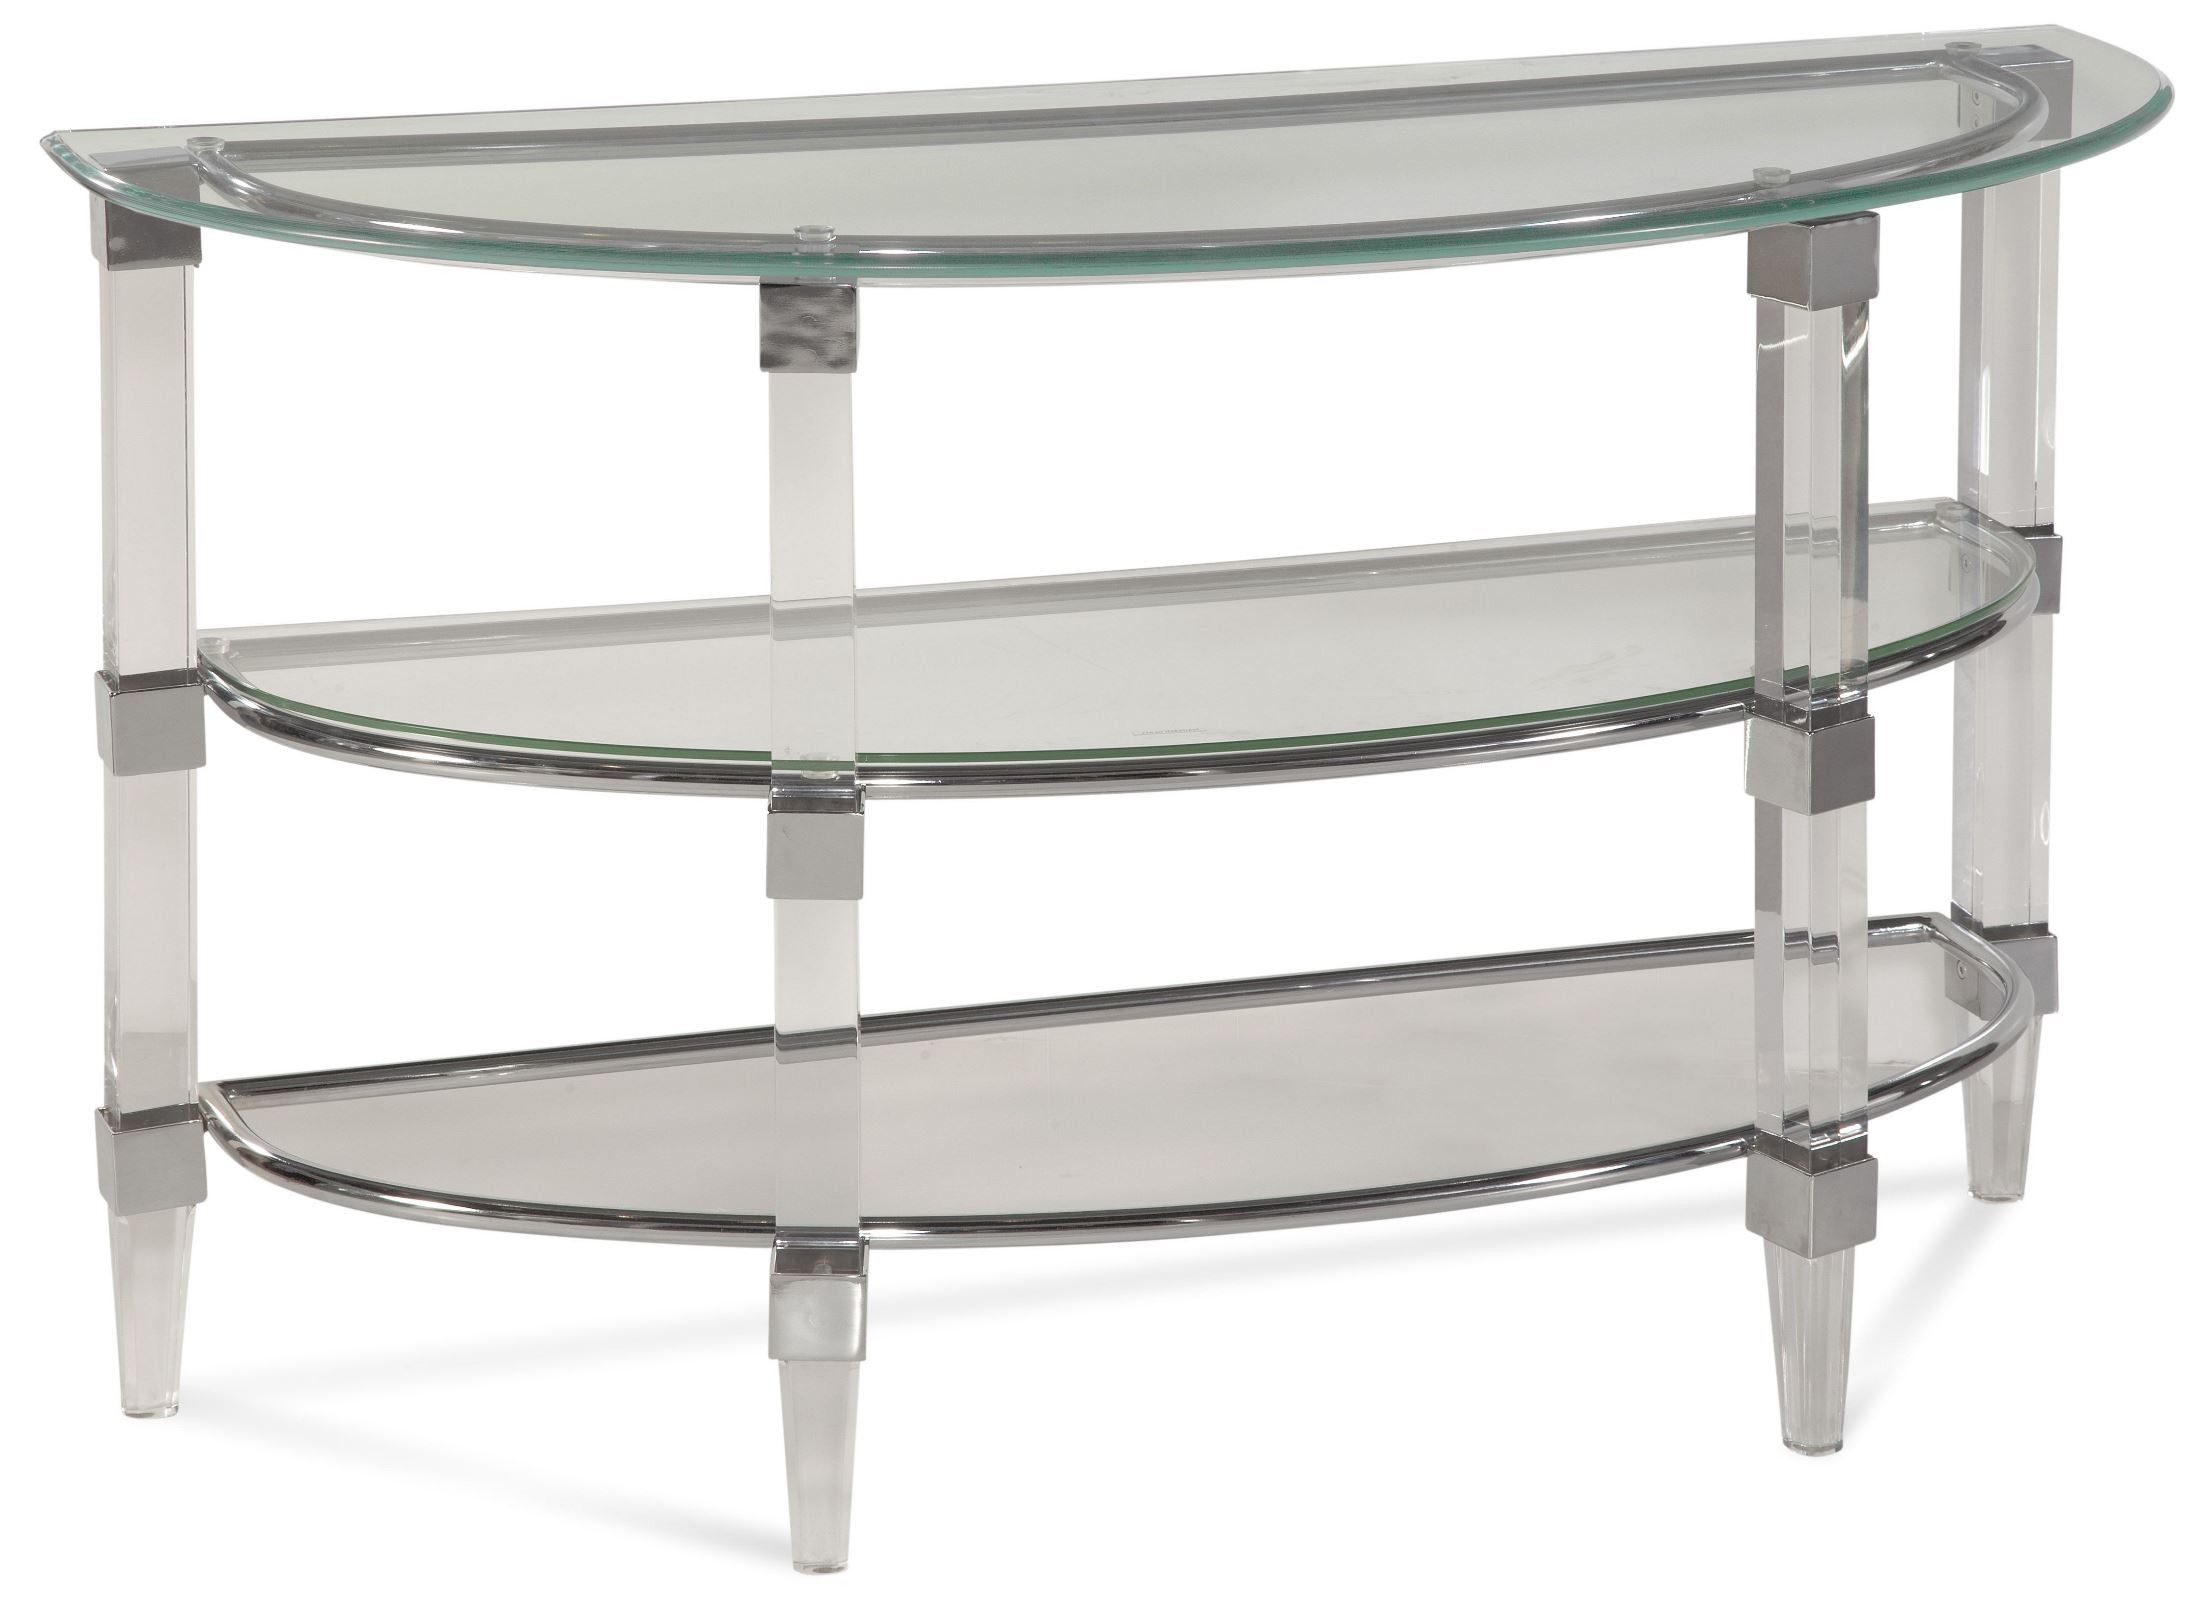 Cristal Acrylic And Chrome Console Table From Bassett Mirror | Coleman Throughout Acrylic Console Tables (View 19 of 20)